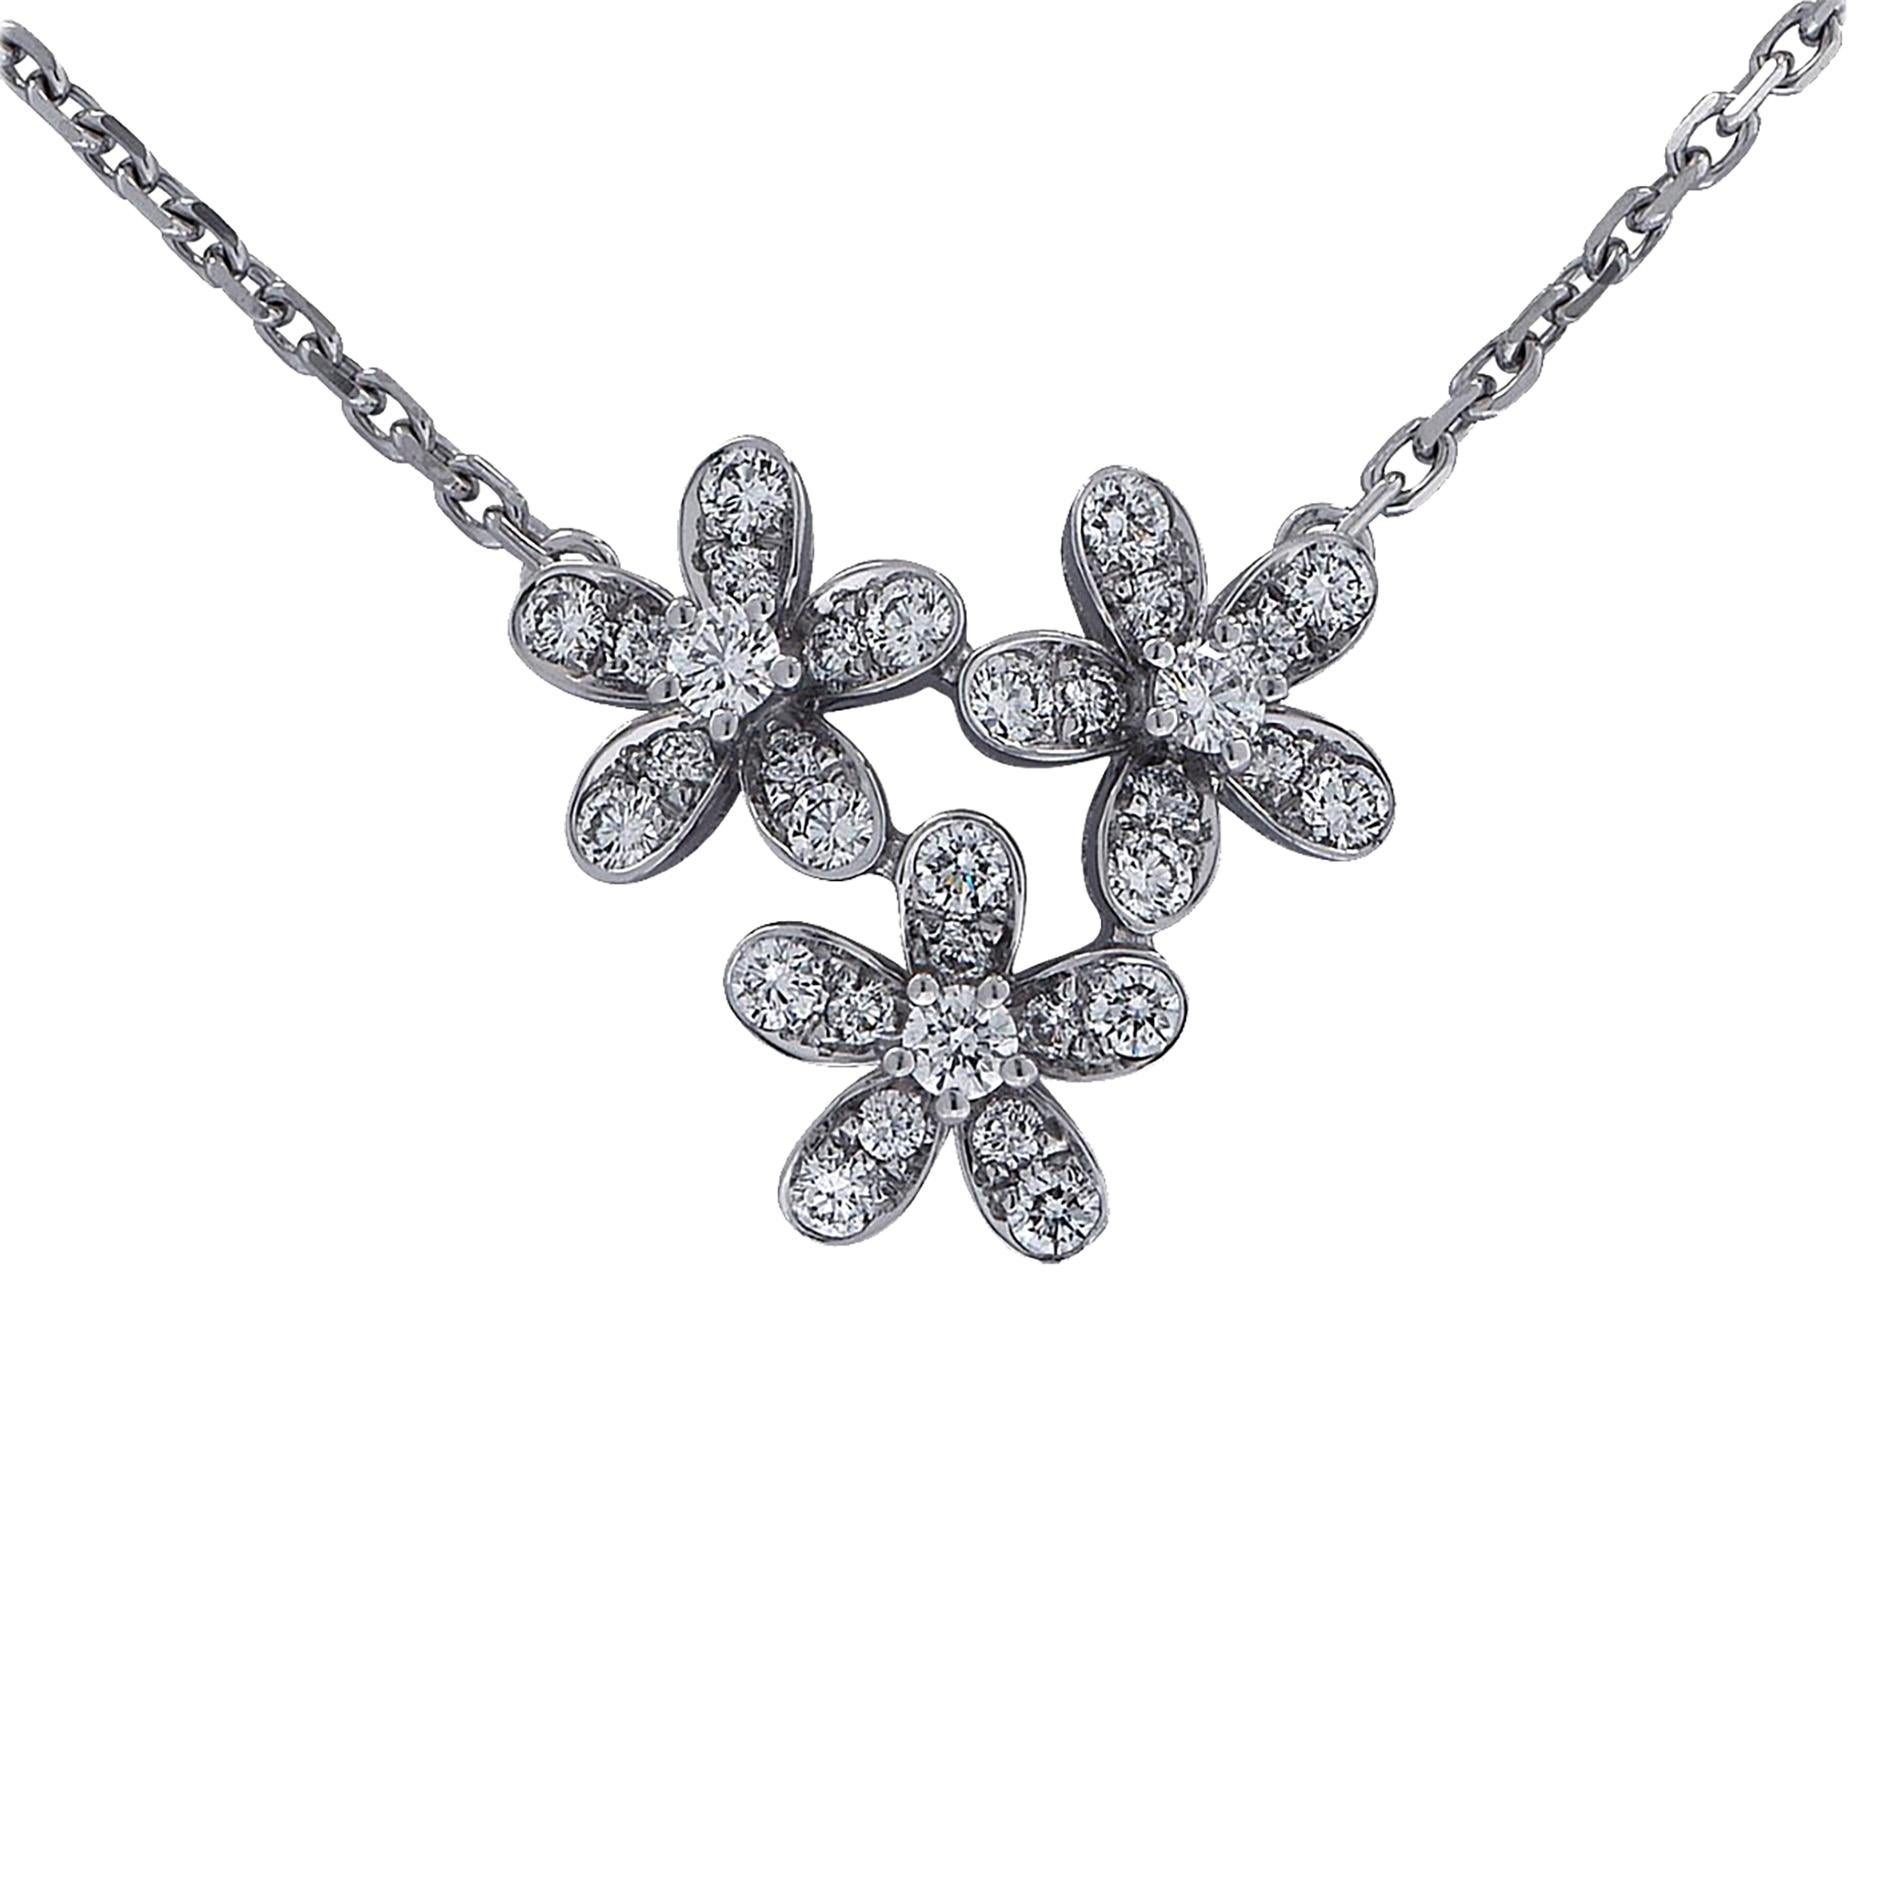 Brilliance Jewels, Miami
Questions? Call Us Anytime!
786,482,8100

Designer: Van Cleef & Arpels

Collection: Socrates

Style: 3 Flower Necklace

Metal Type: White Gold

Metal Purity: 18k​​​​​​​

Stones: 44 Round Brilliant Cut Diamonds

Diamond